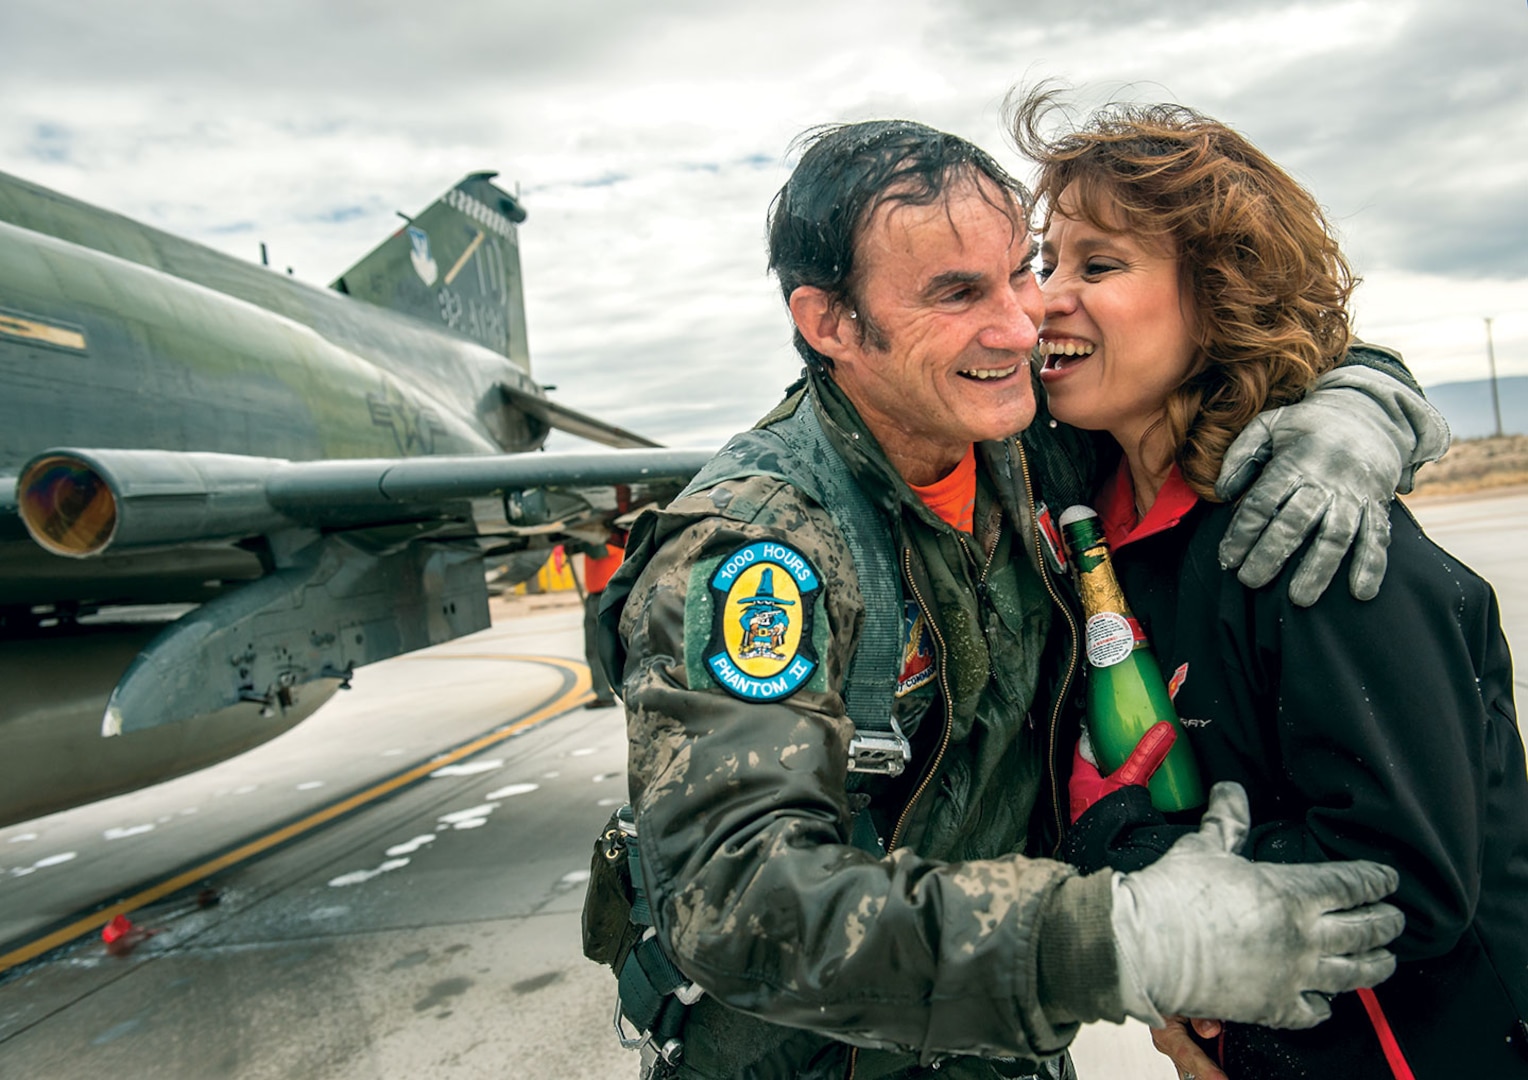 Civilian QF-4E Pilot/Controller Lieutenant Colonel Jim “Wam” Harkins, USAF (Ret.), hugs his wife, Annette, after being showered with champagne upon exiting cockpit of his McDonnell Douglas F-4 Phantom II